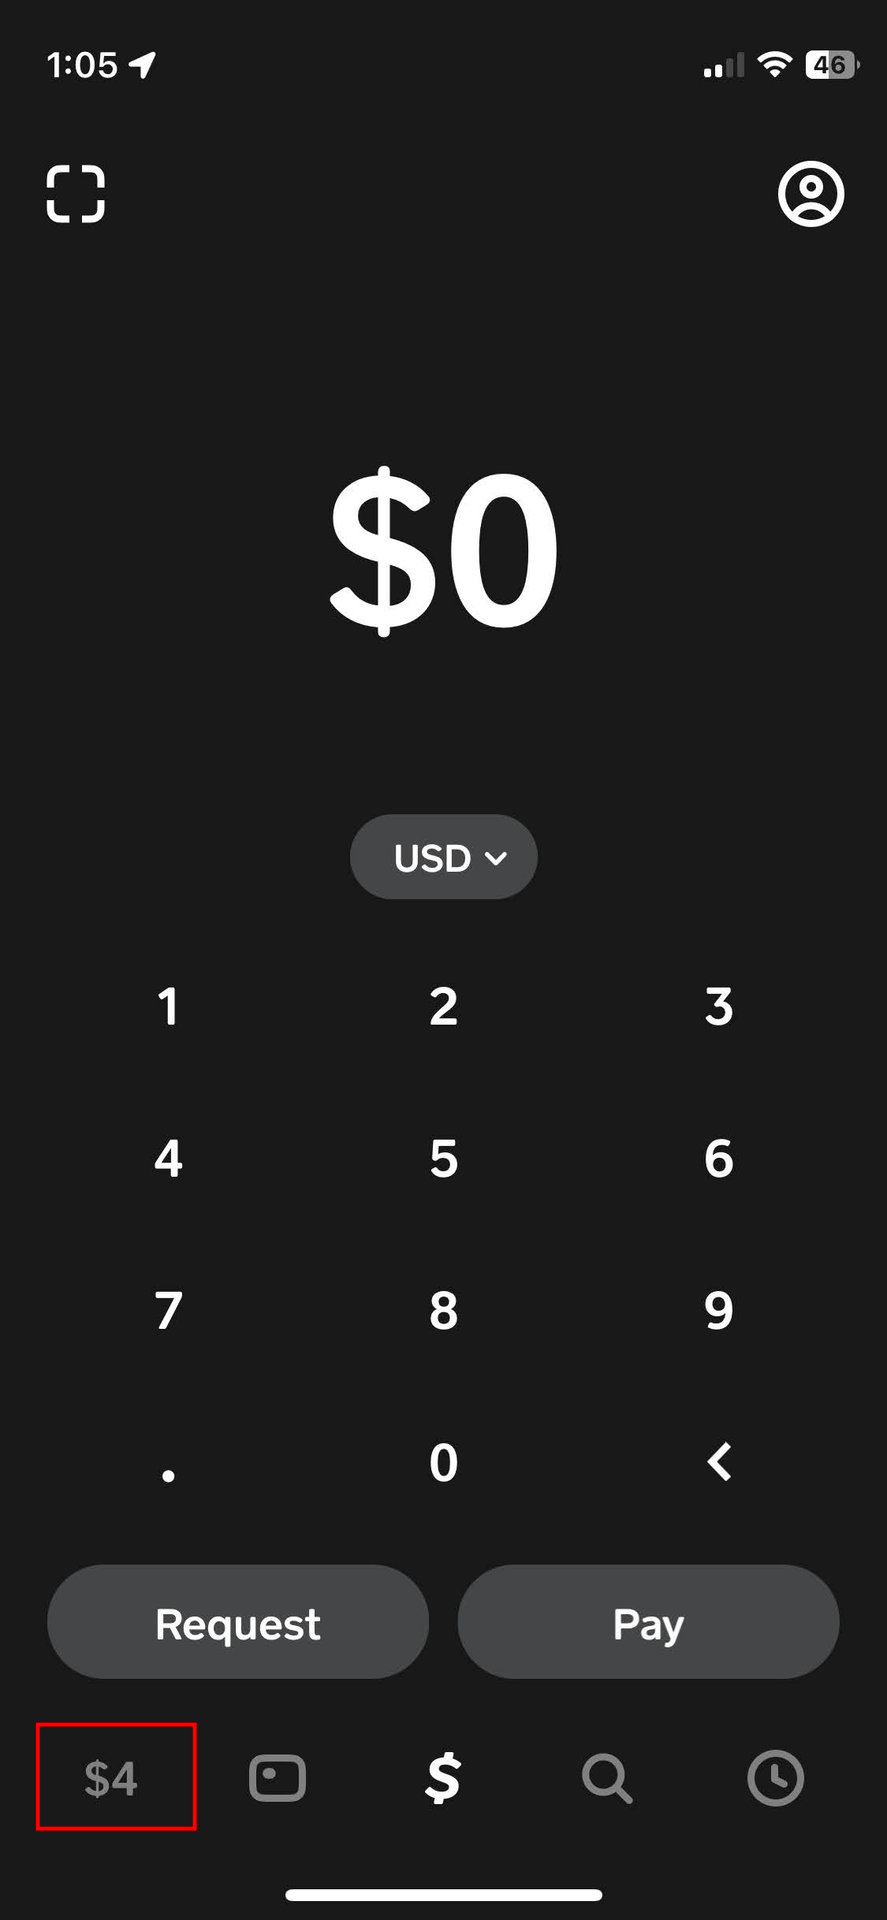 How to set up direct deposit on Cash App using Automatic Setup 1